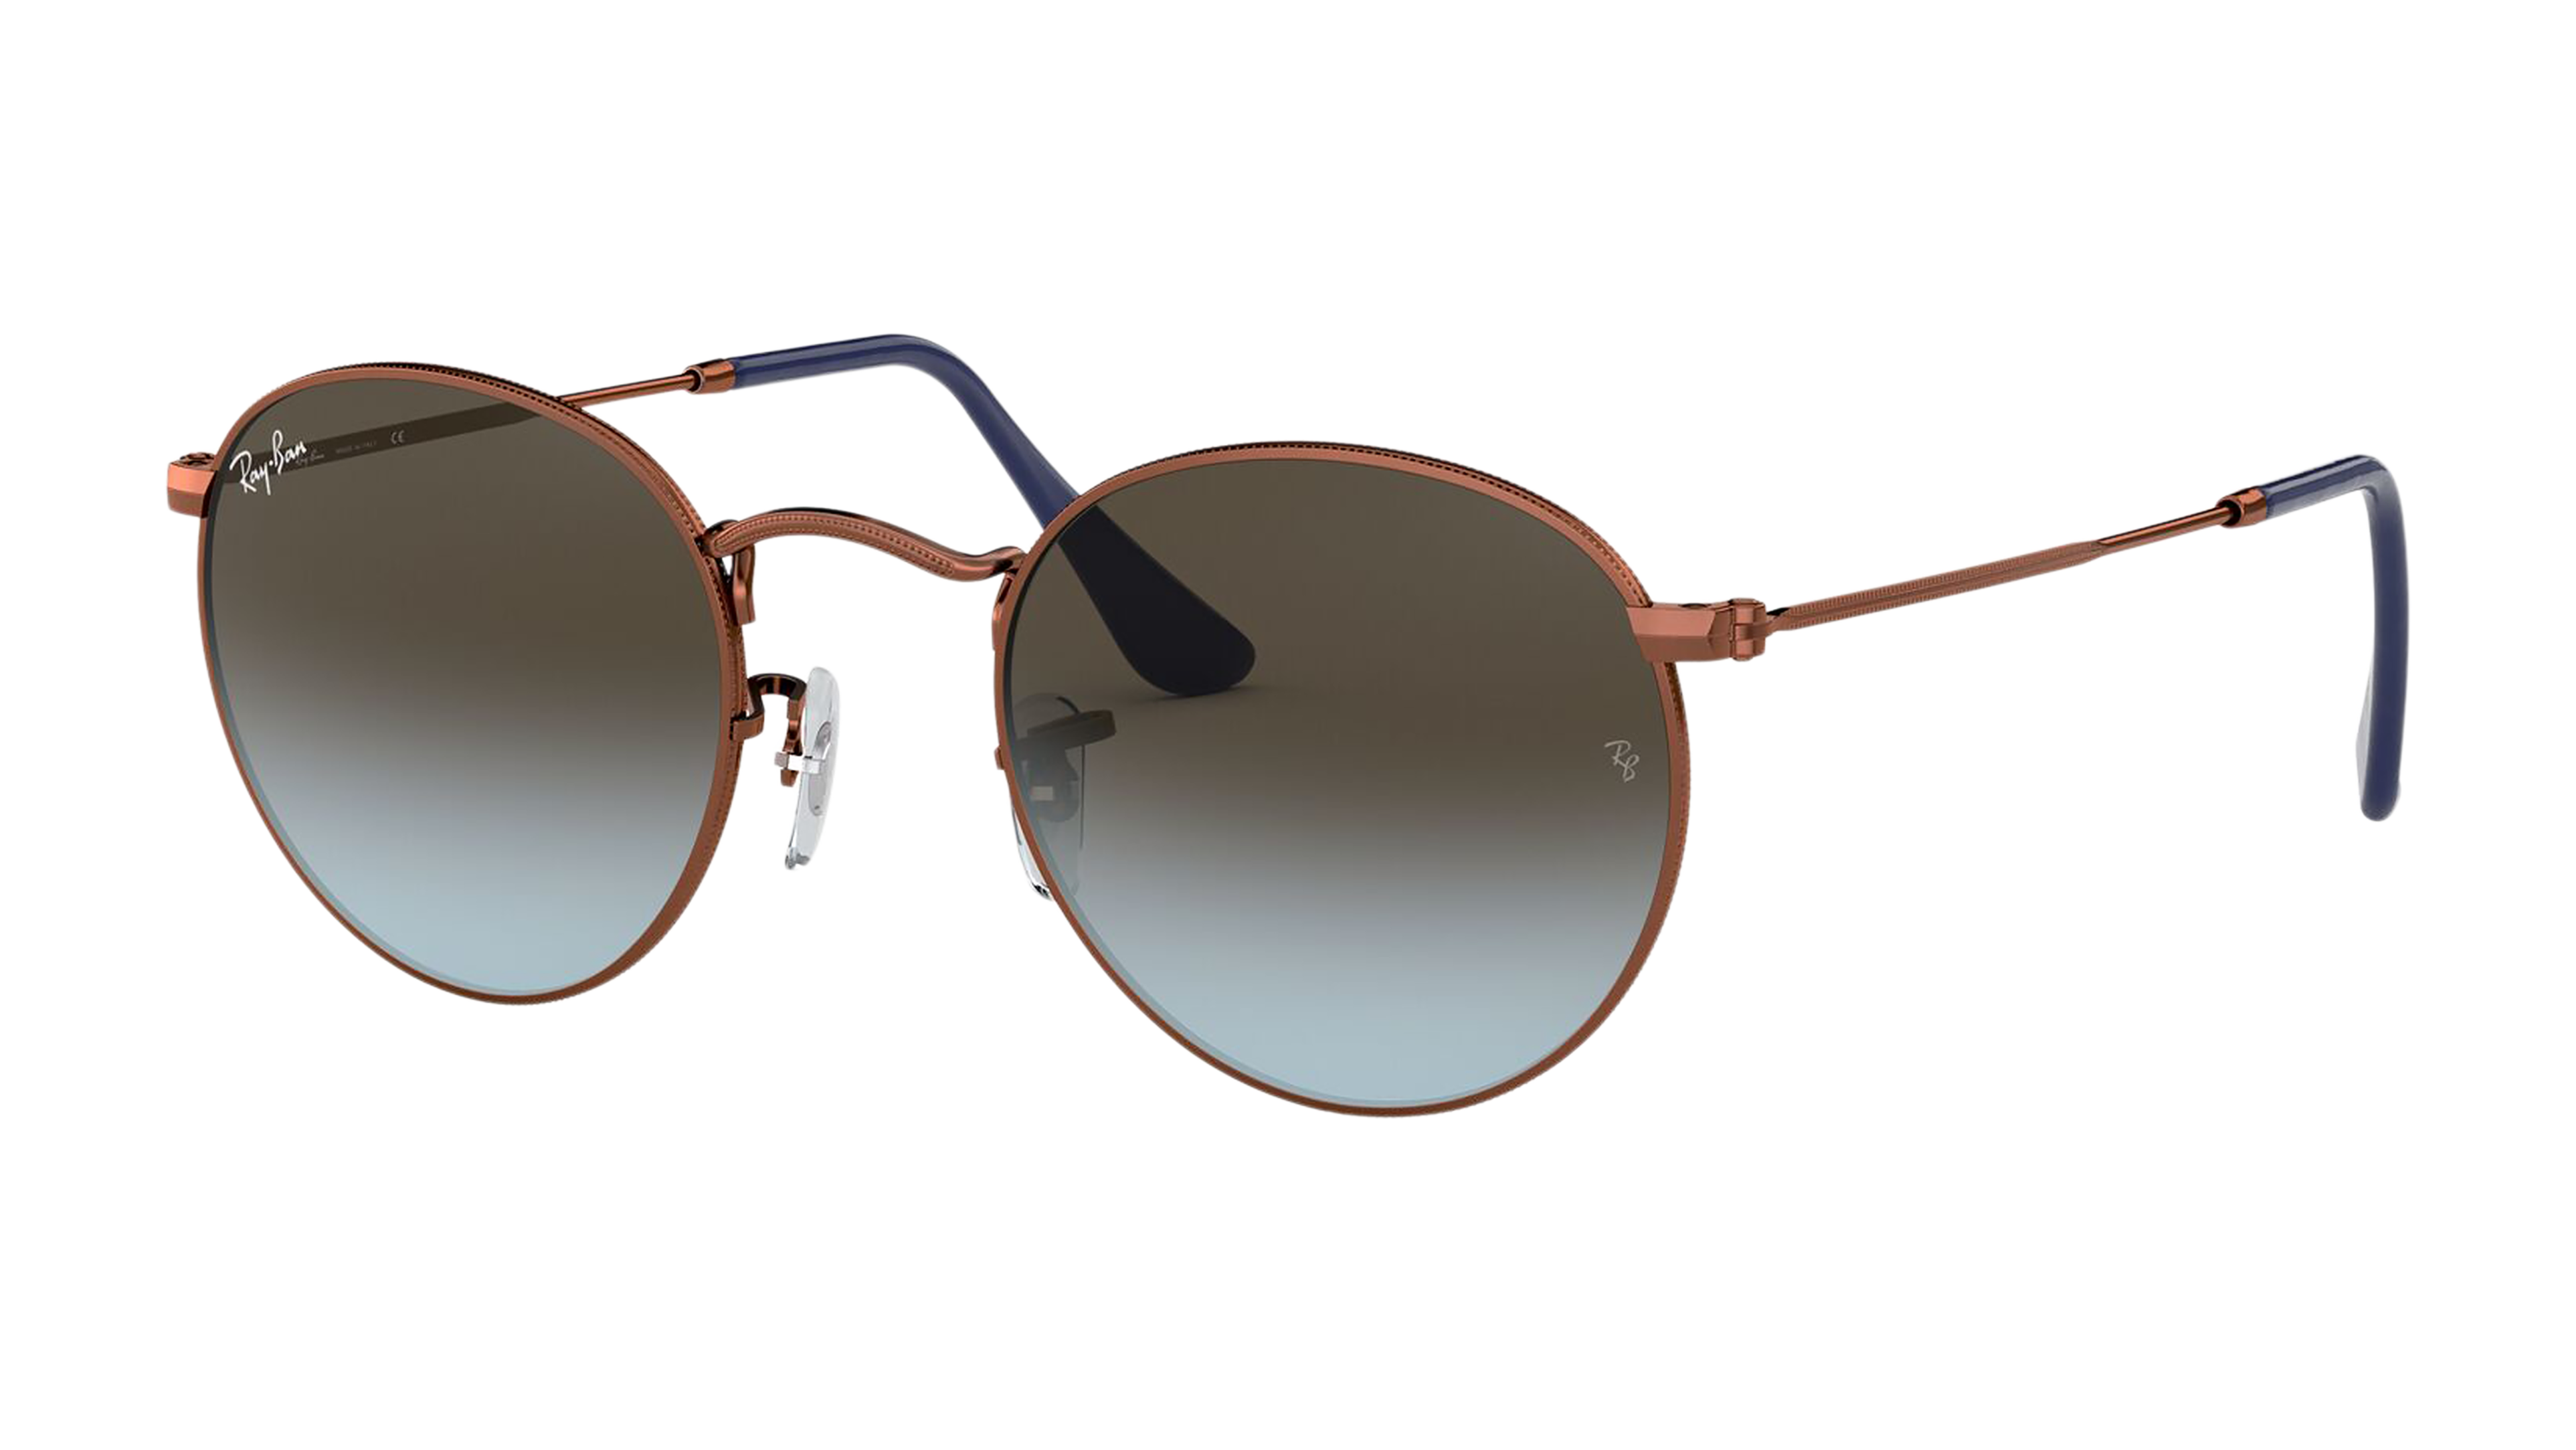 Angle_Left01 Ray-Ban Round Metal RB3447 001 Groen / Goud